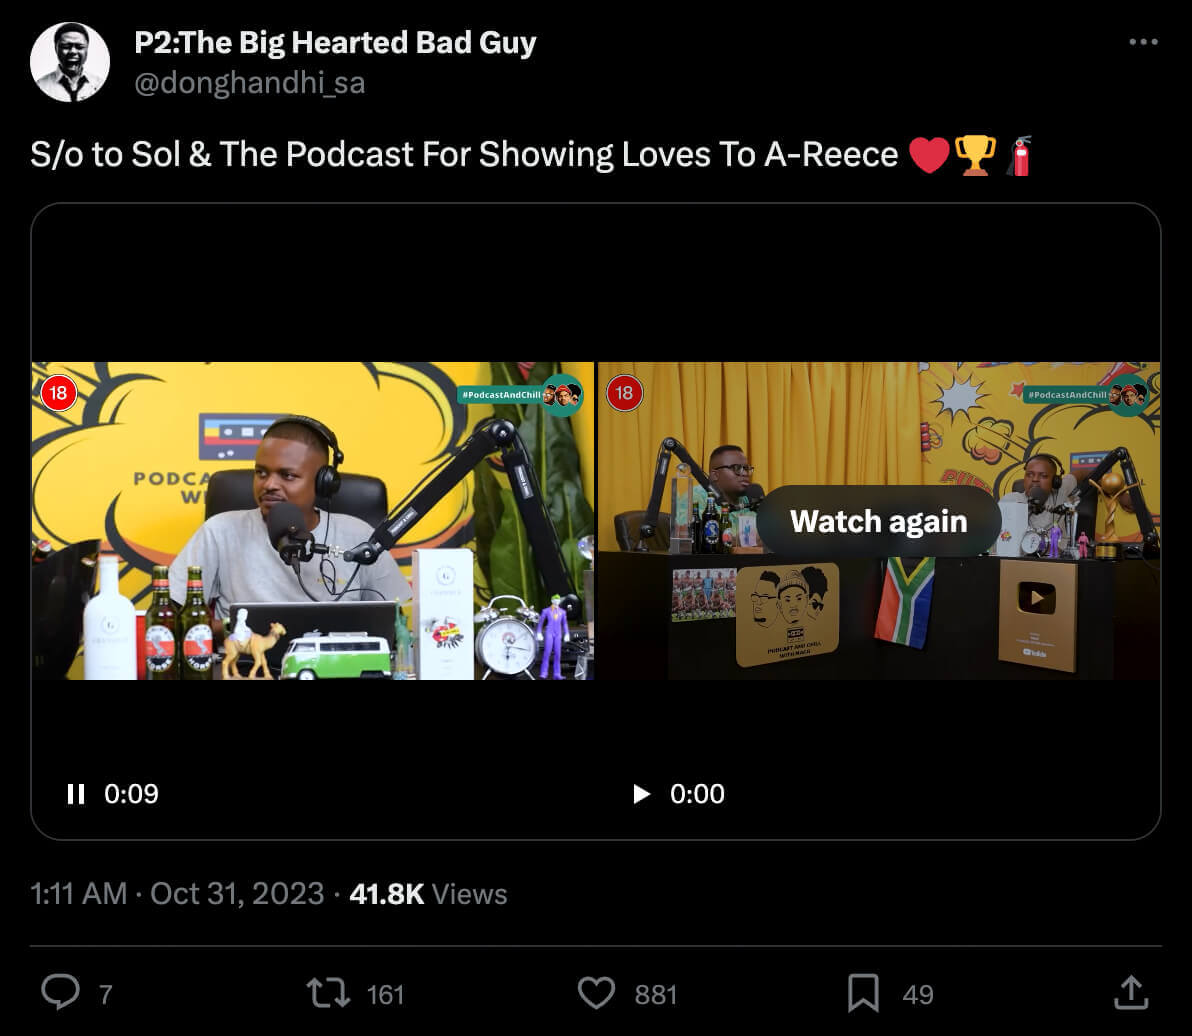 S/O to The Podcast on social media